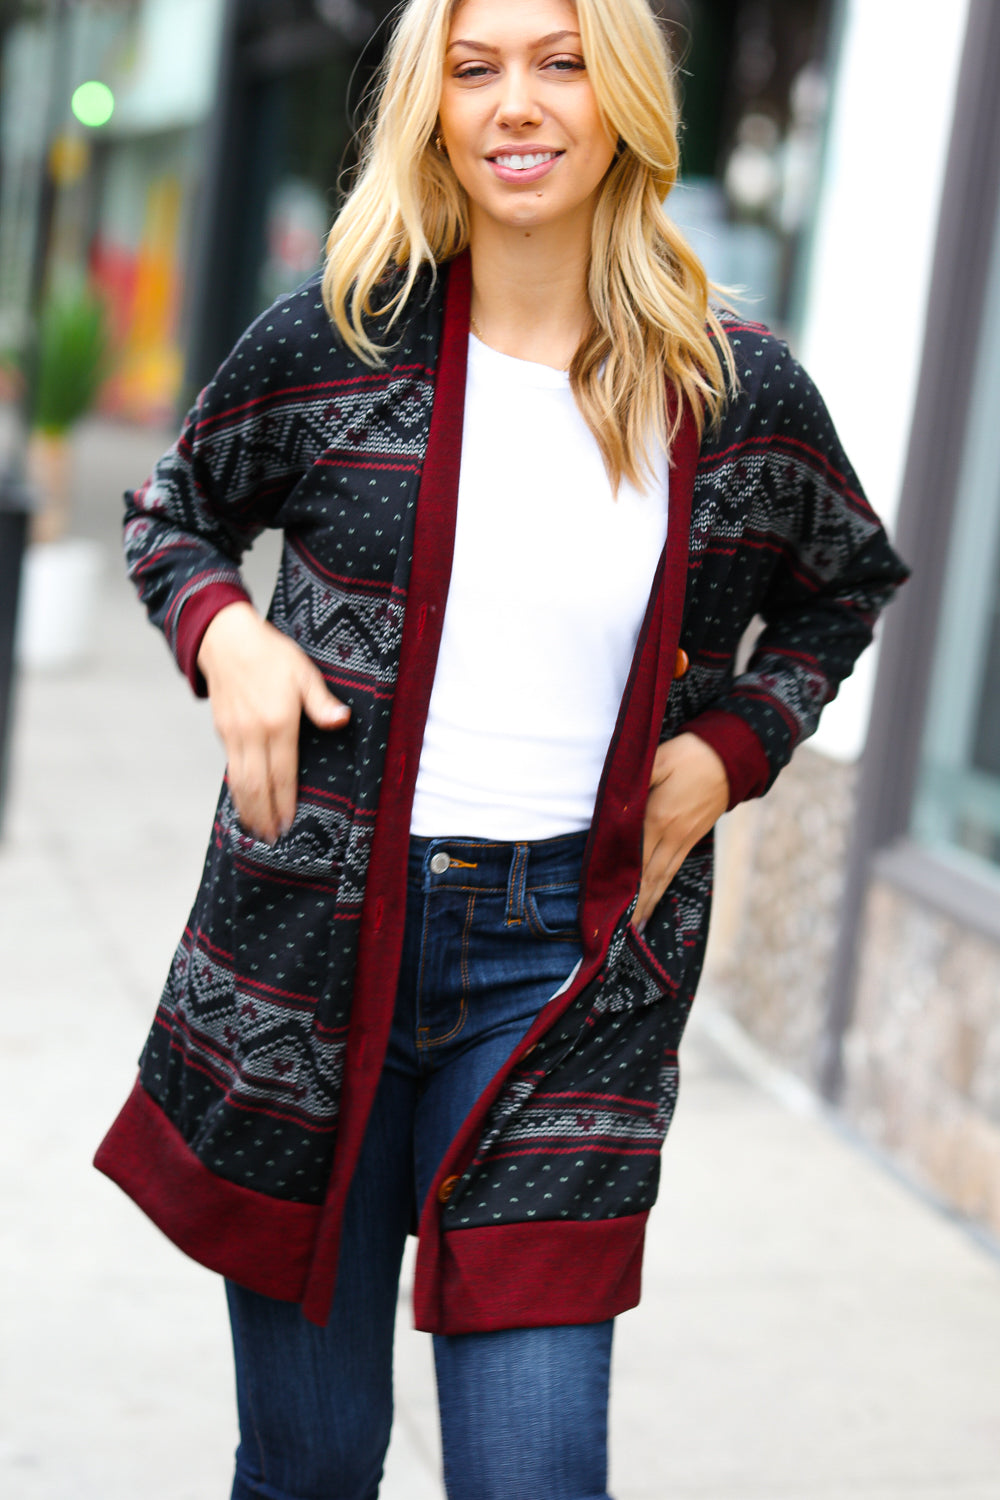 All Class Holiday Cardigan